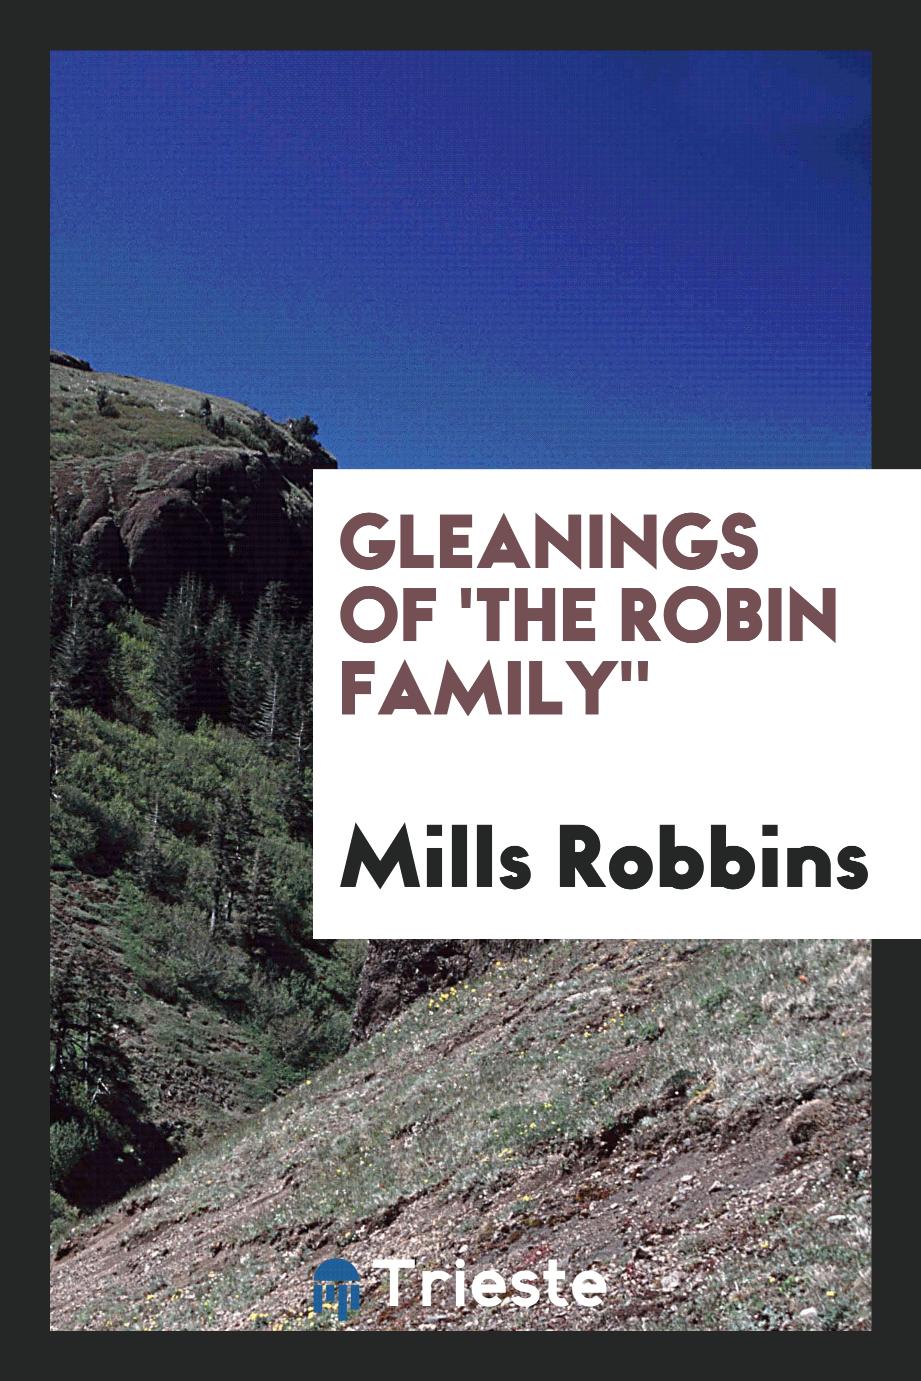 Gleanings of 'the Robin family"